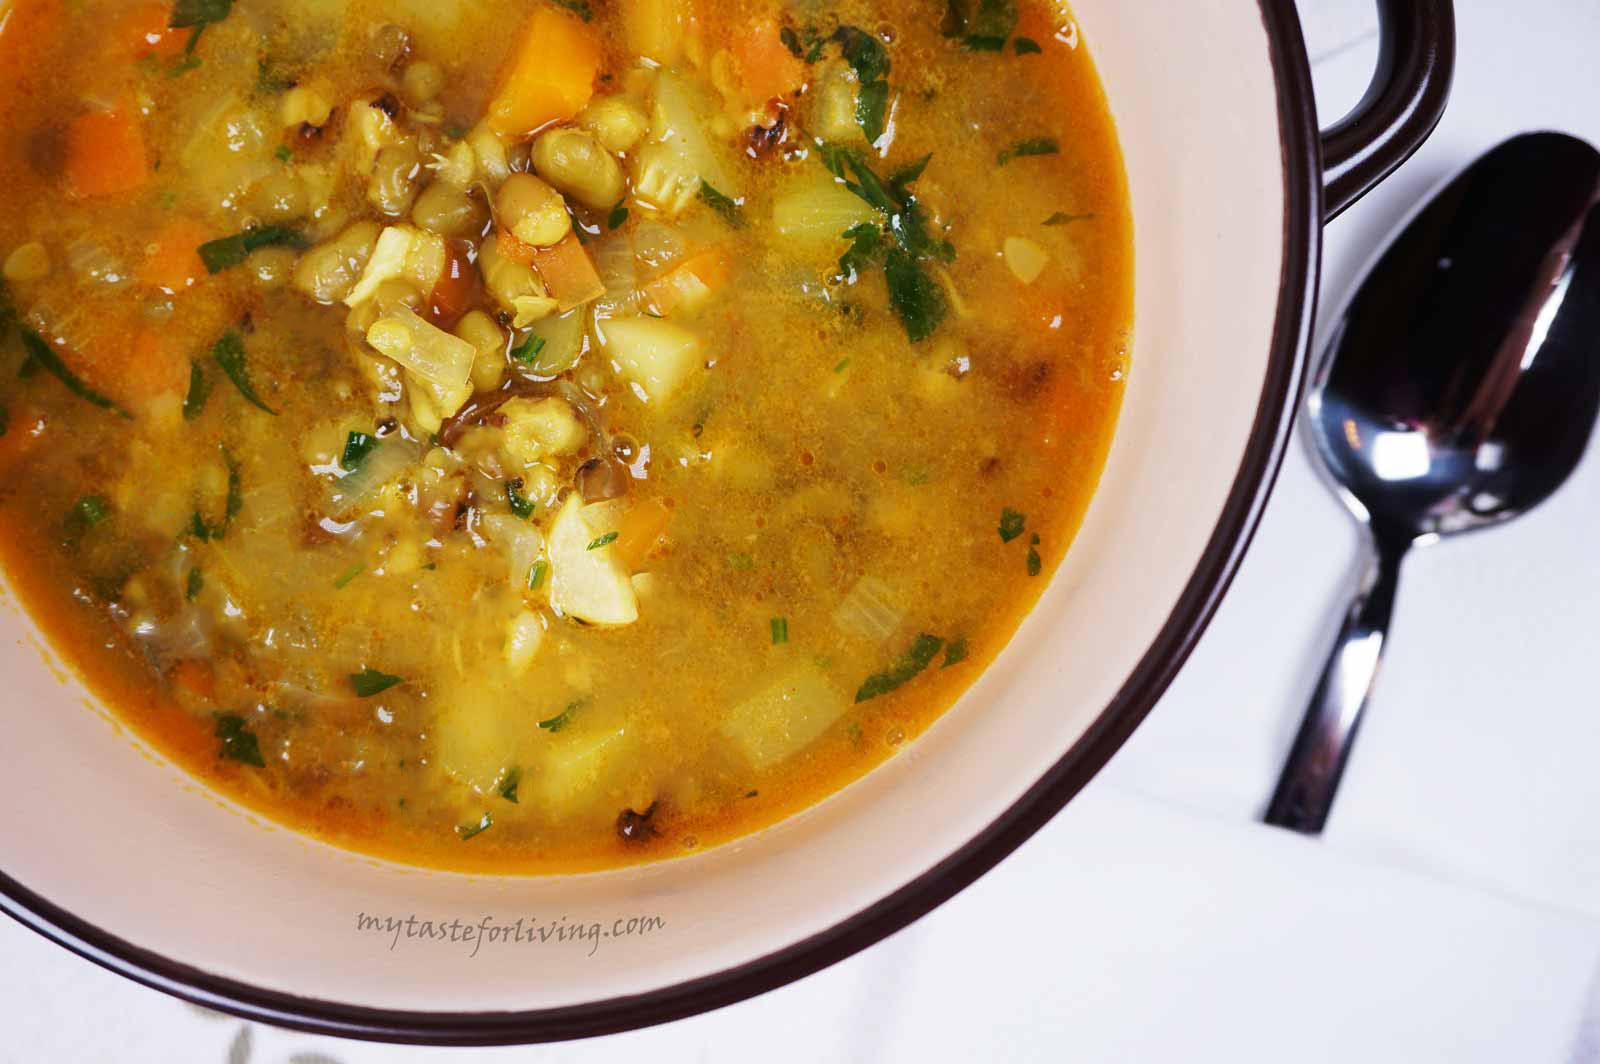 Mung bean stew prepared with creamy coconut milk and vegetables - zucchini, carrots, onions and garlic. This vegan healthy stew is easy to prepare and is full of vitamins and proteins.